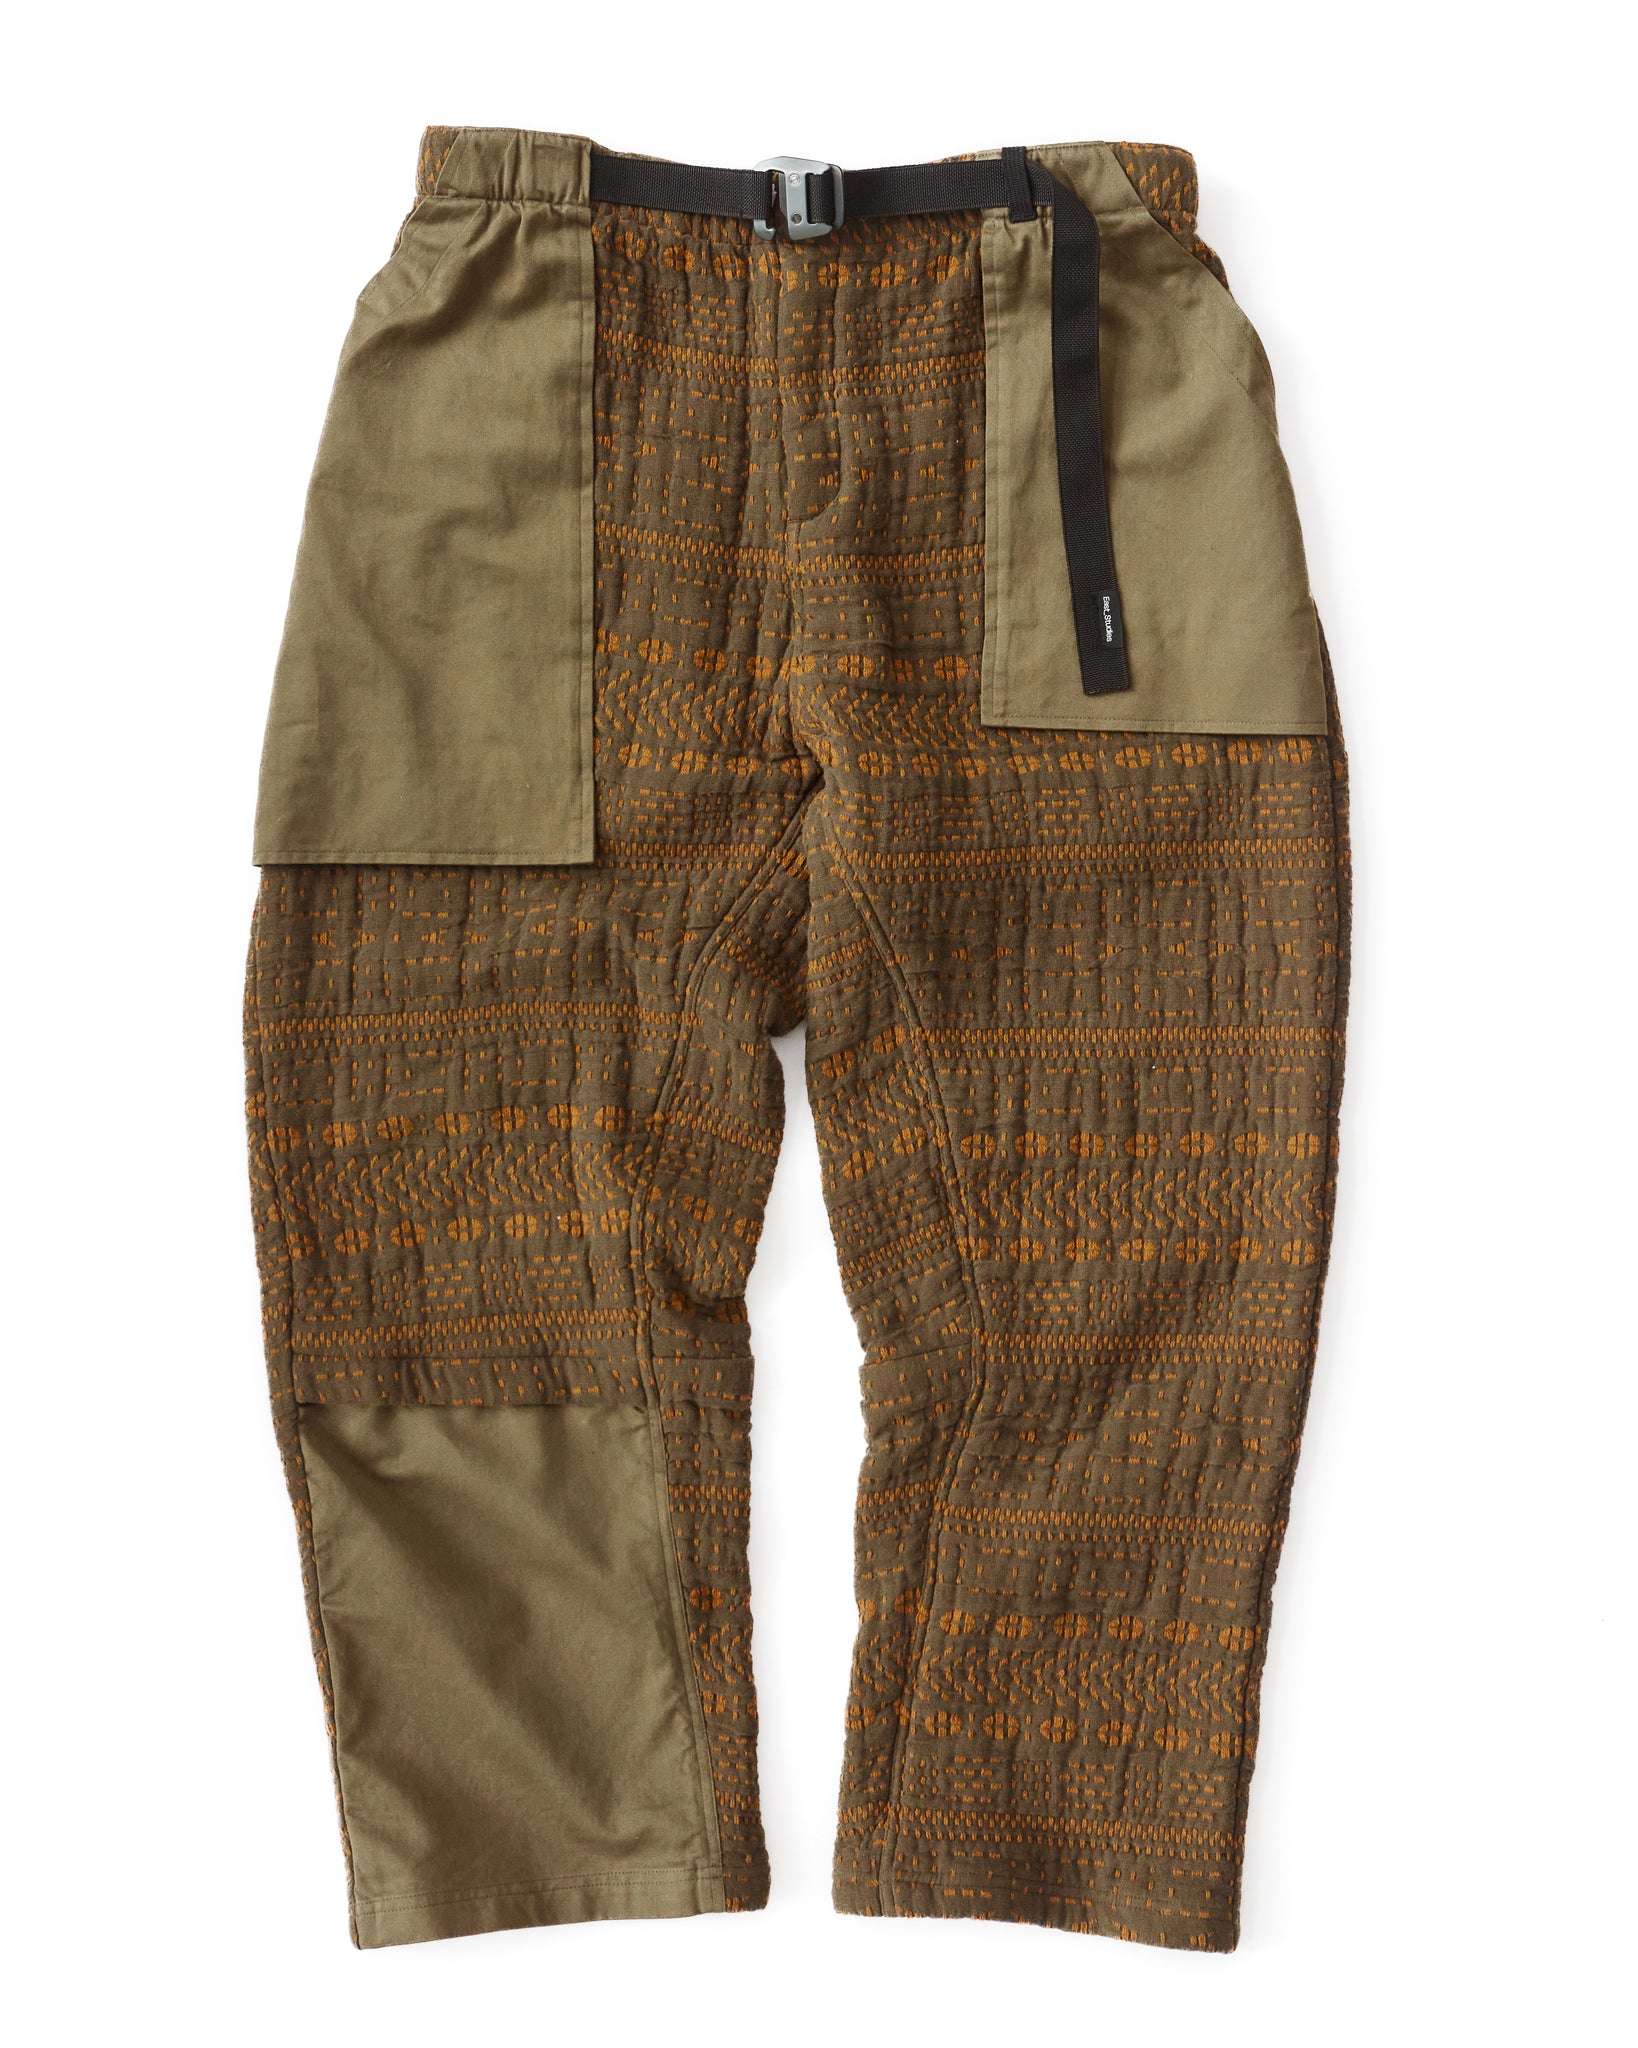 EAST_STUDIES MS - 103 FIELD PANT - WILLOW GREEN HAND QUILTED COTTON / SATEEN